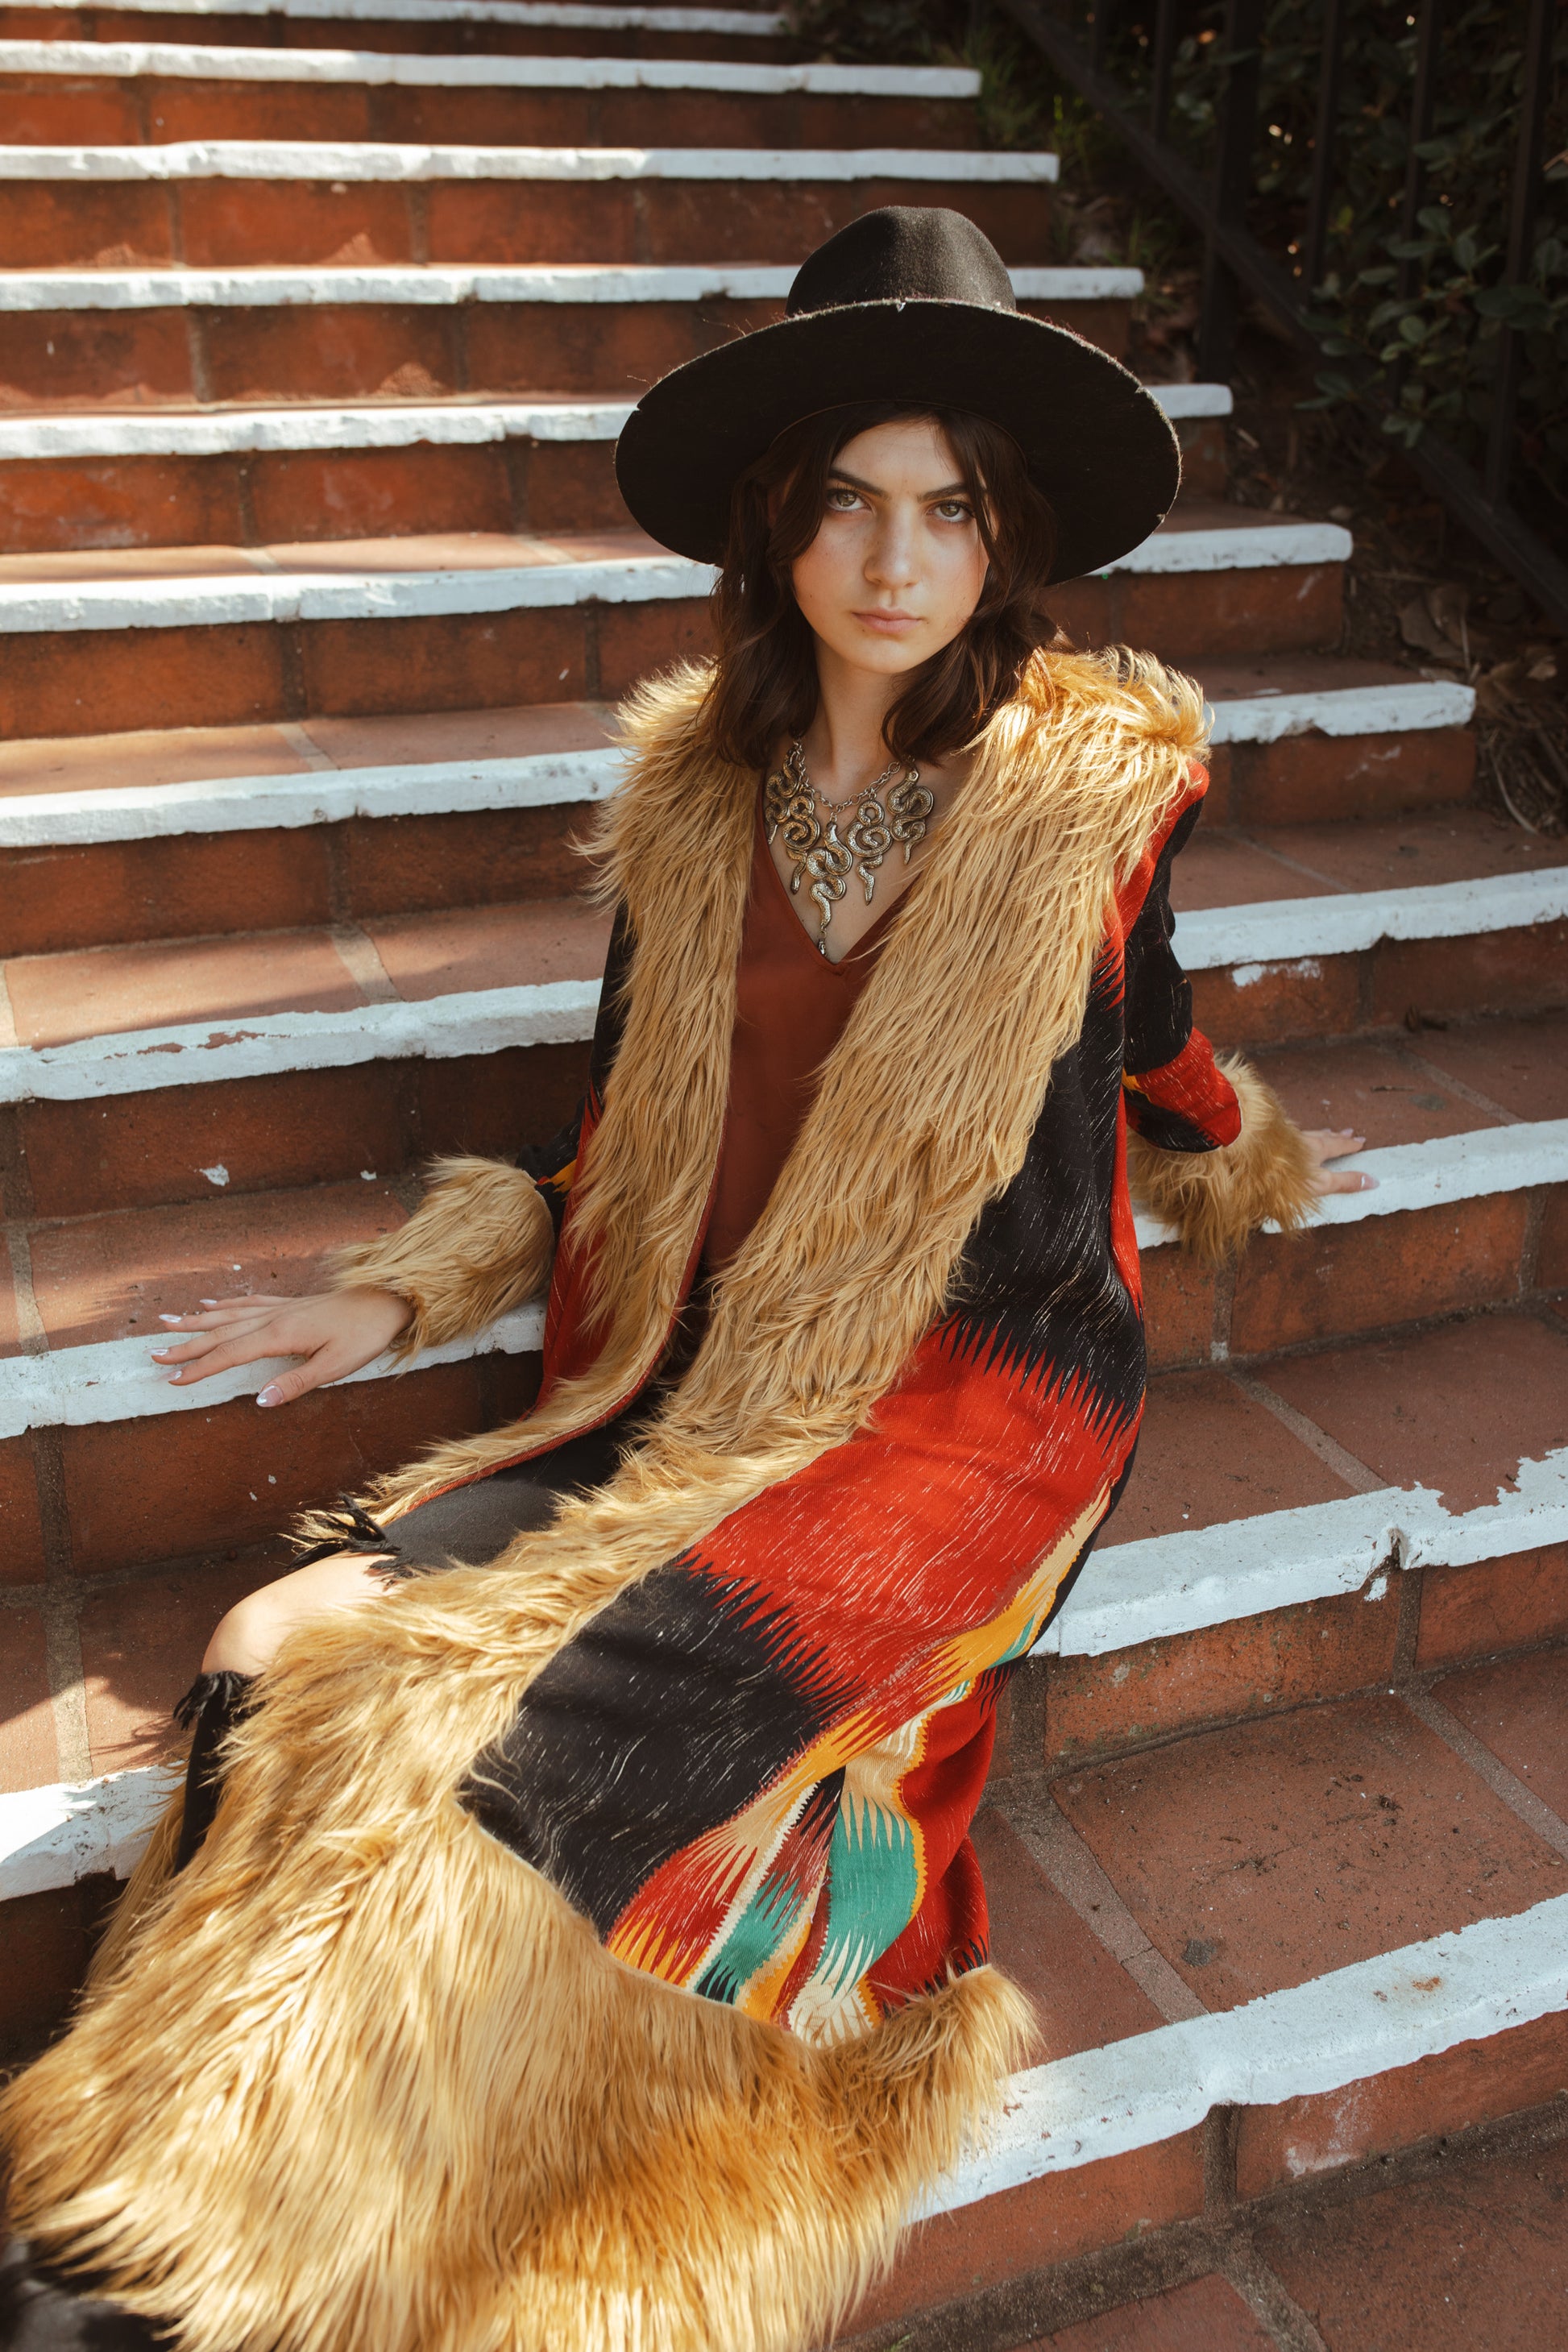 Long, penny lane style trench coat fashioned from a thick, abstract modernist colorblock print fabric featuring red, teal, yellow, black, and beige. Embellished with long tan faux fur along collar, lapel, cuffs, and hem. Retro bohemian color field art in style.